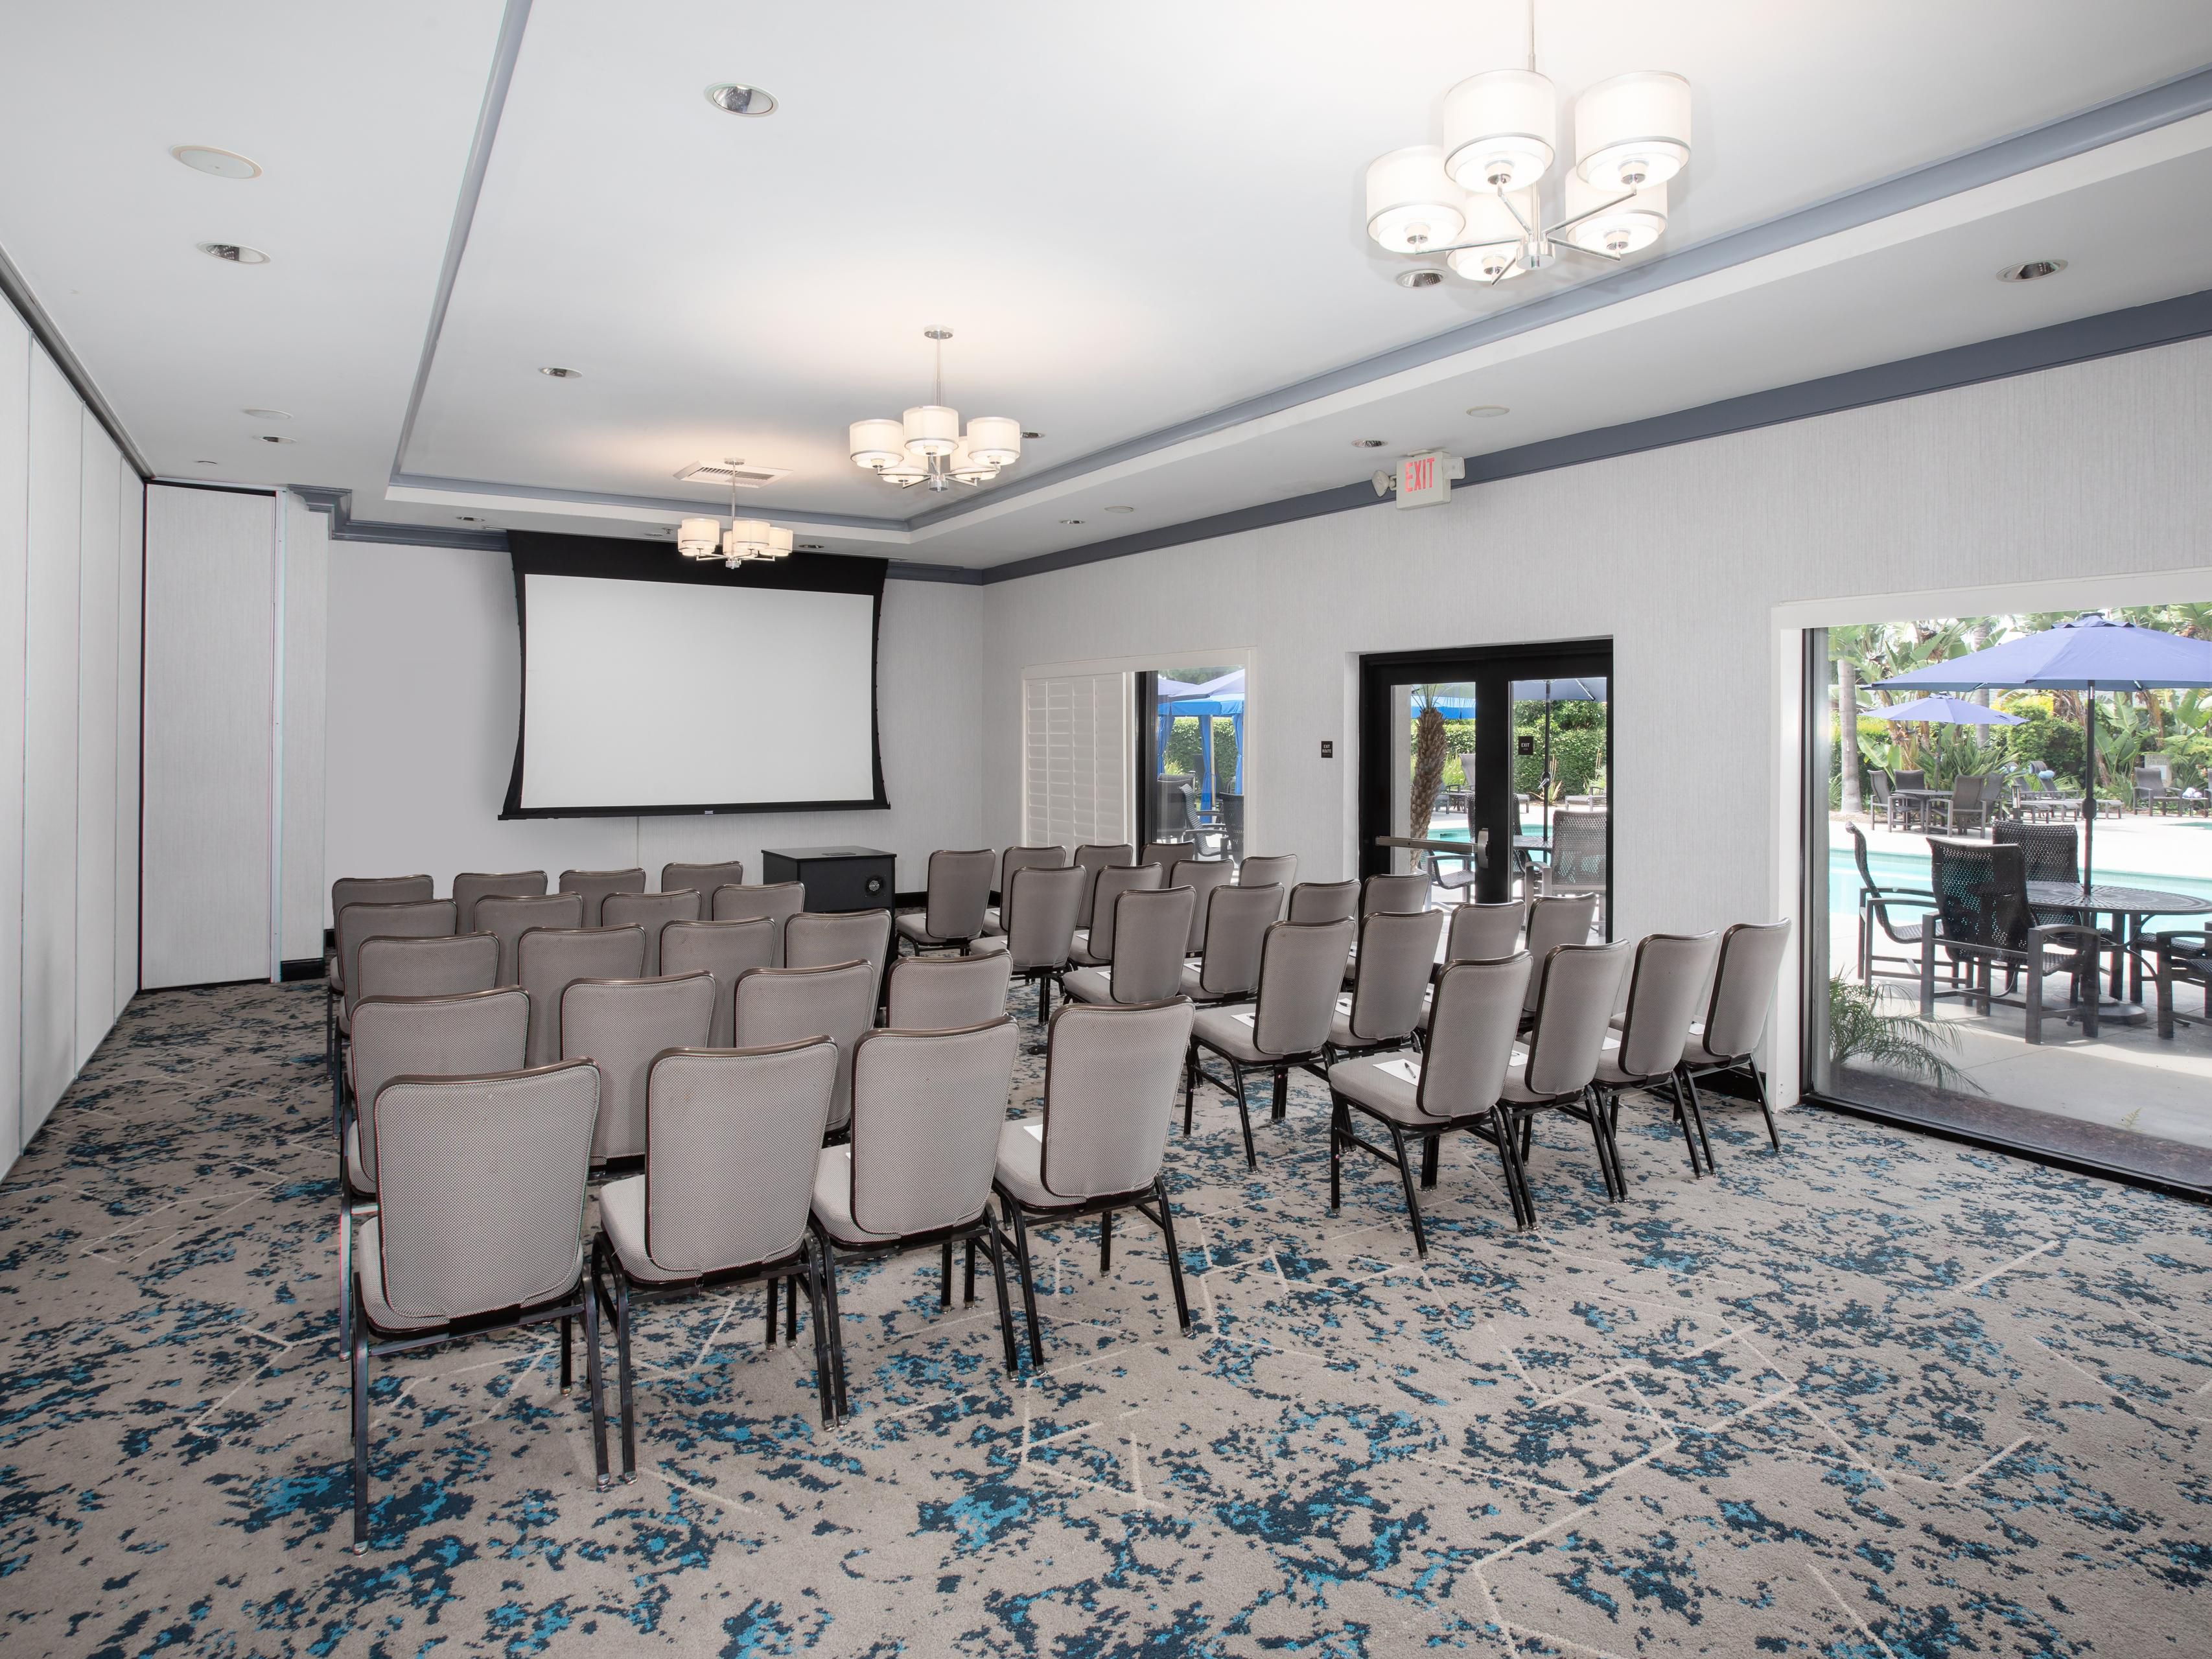 Host your events in our 8,400 sq. ft. of indoor and outdoor spaces. The Crowne Plaza Costa Mesa offers elegant venues, including two ballrooms and a pool deck, perfect for conferences, meetings, weddings, and social gatherings. With our expert staff managing every detail, from catering to A/V support, your event will be extraordinary. 